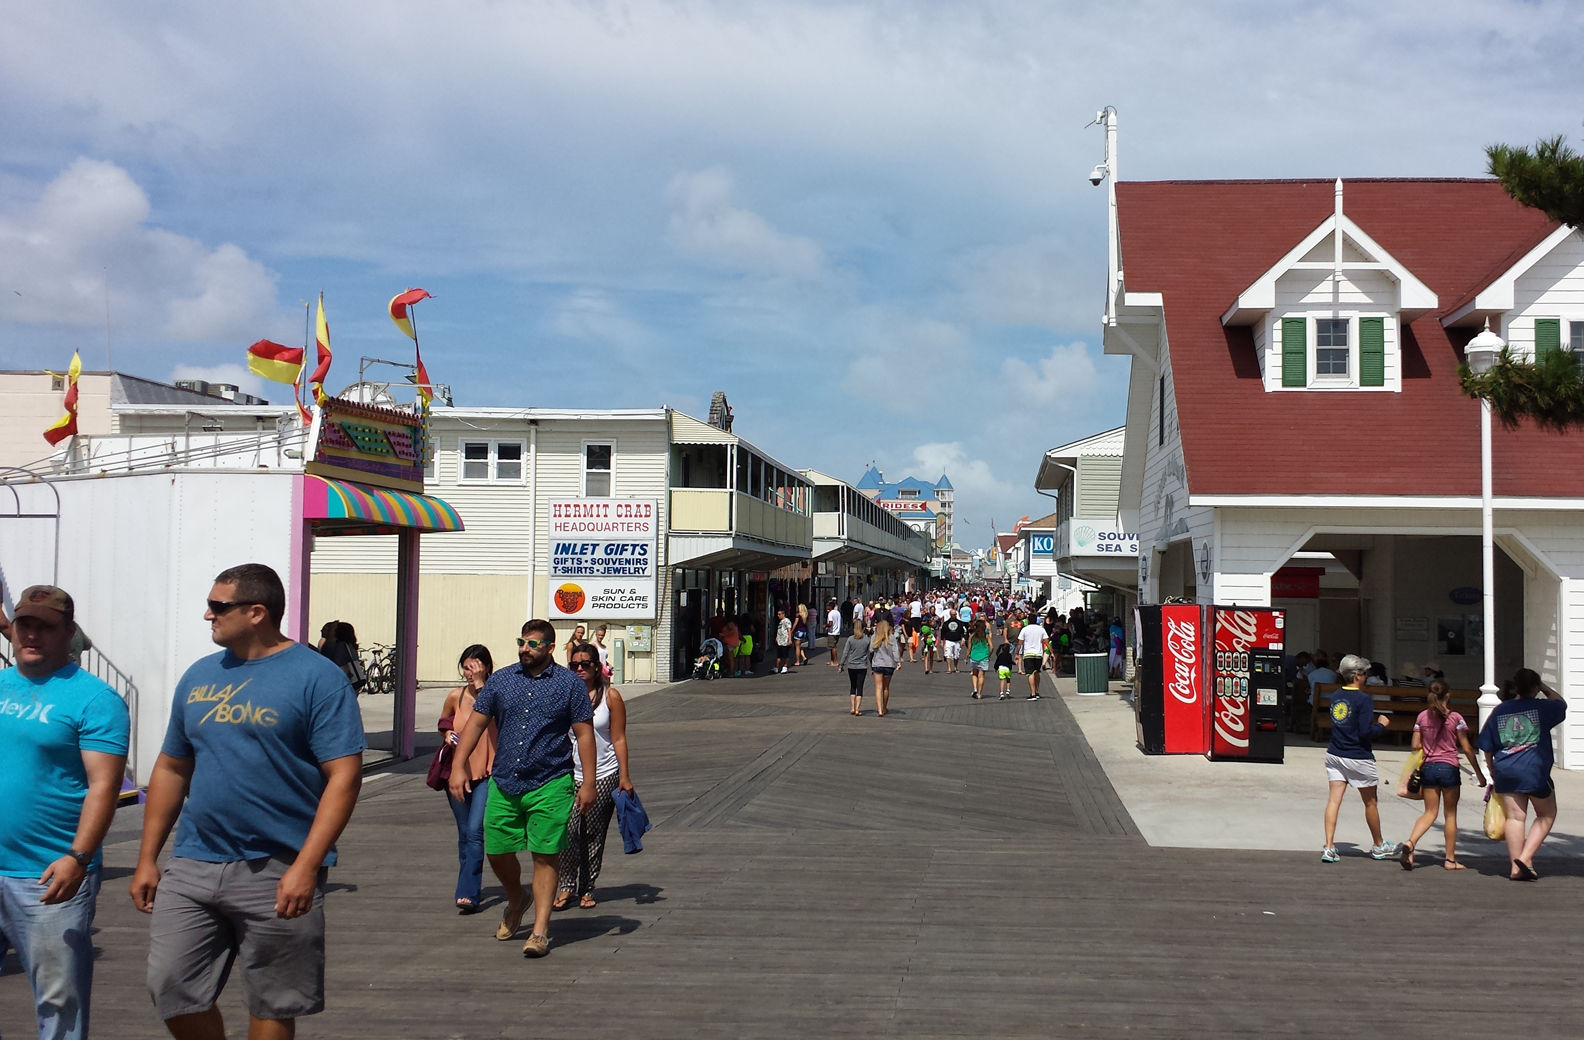 Ocean City's boardwalk is popular for its amusements, shops and bars. (WTOP/Colleen Kelleher)